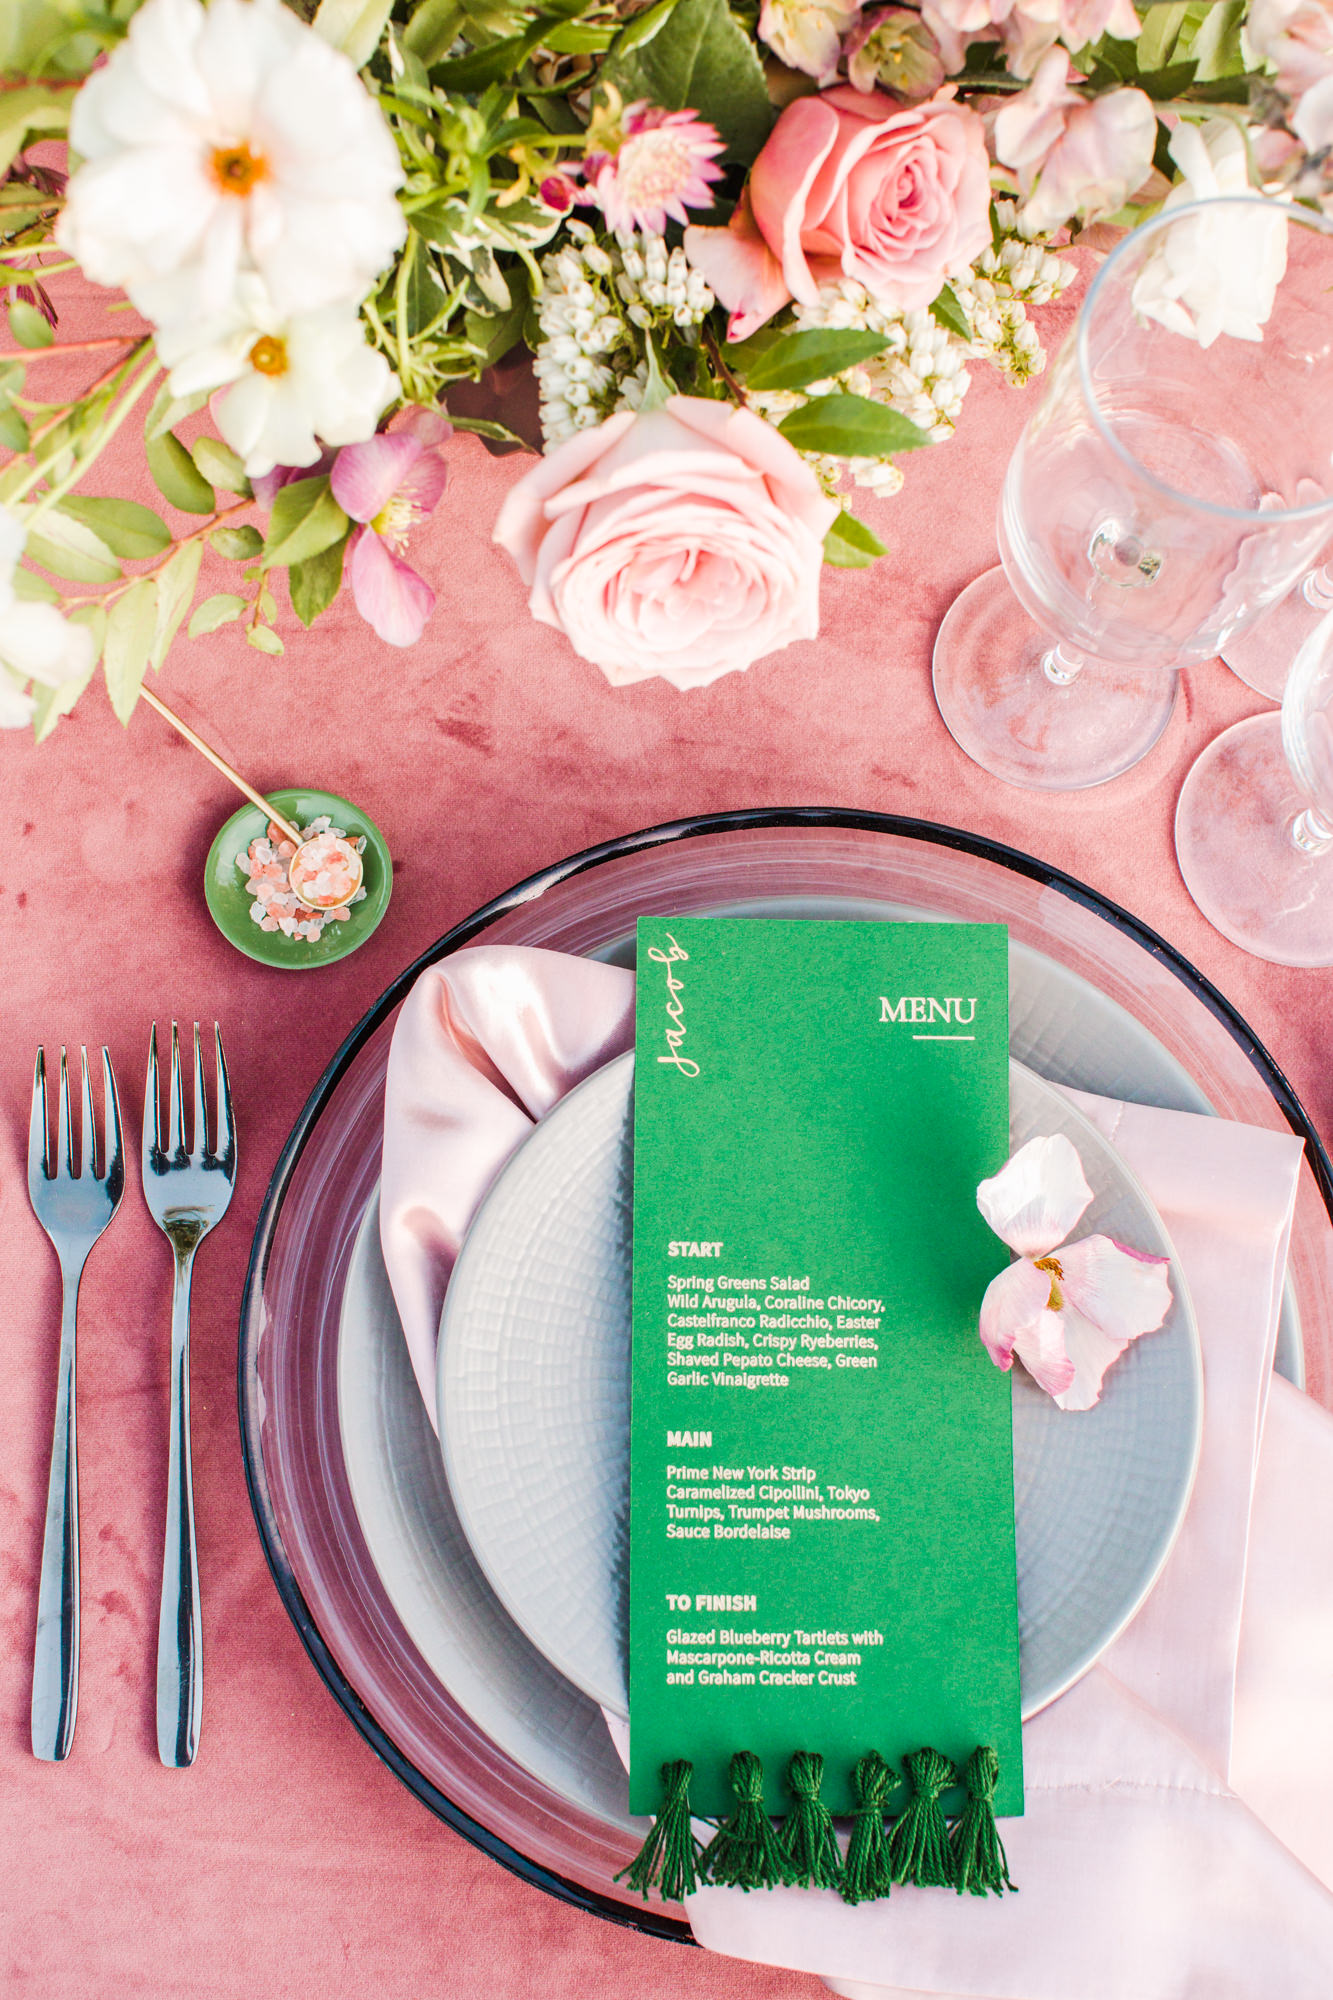 Green and gold foil printed menu with emerald tassels sewn to the bottom for a Filoli Garden wedding